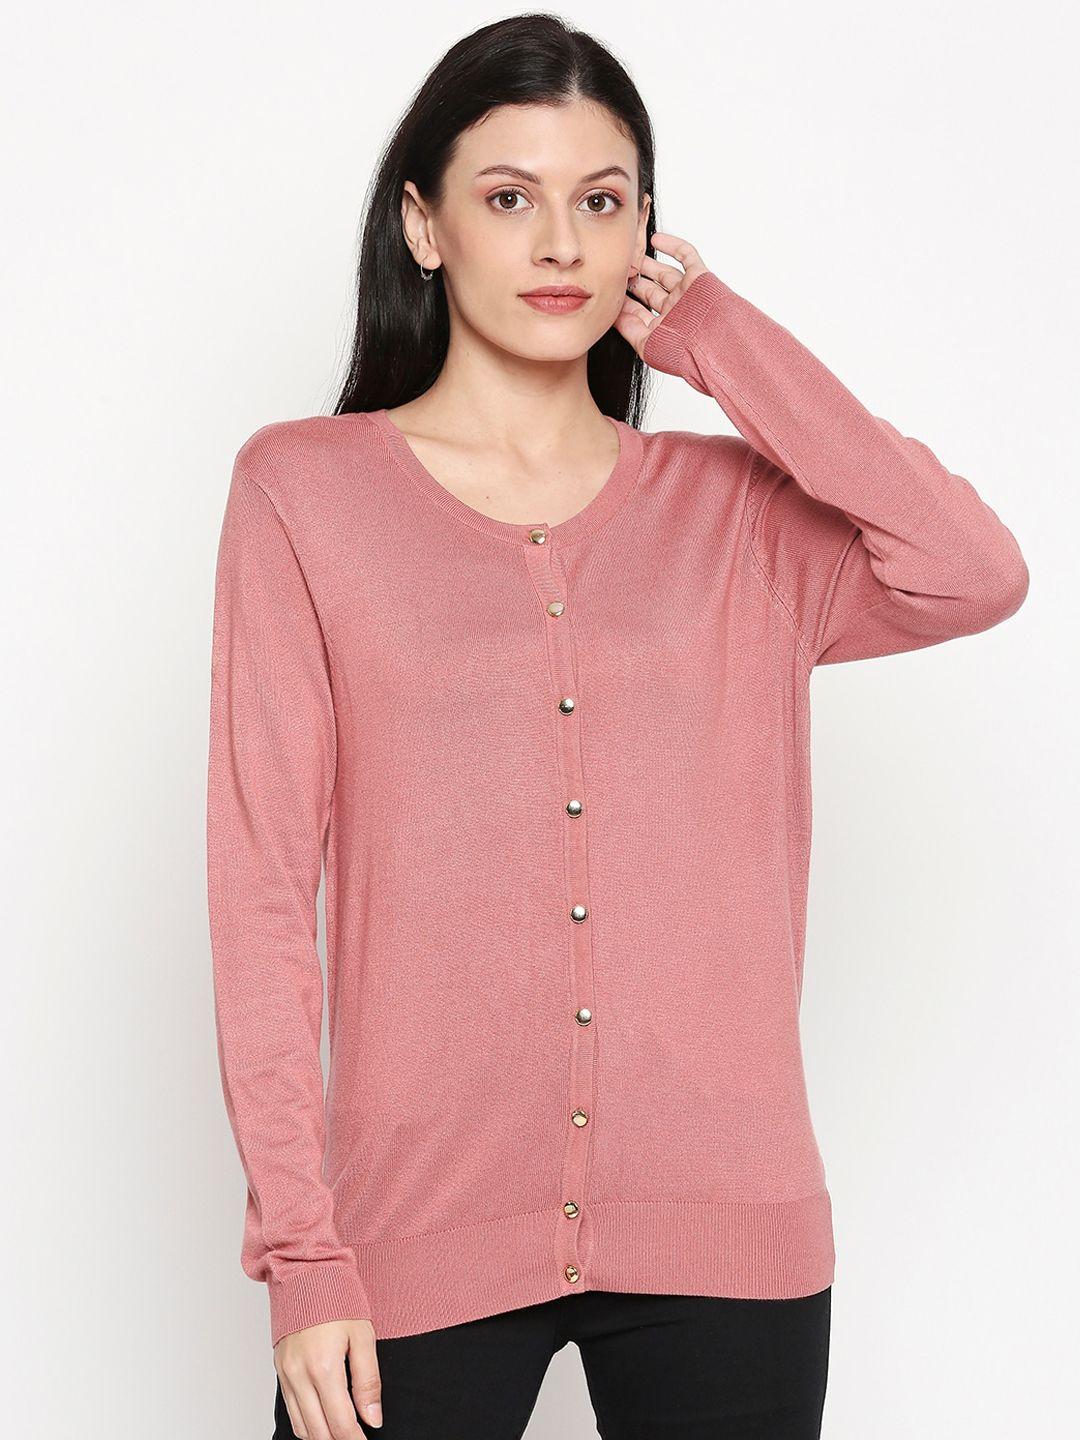 annabelle by pantaloons women pink solid cardigan